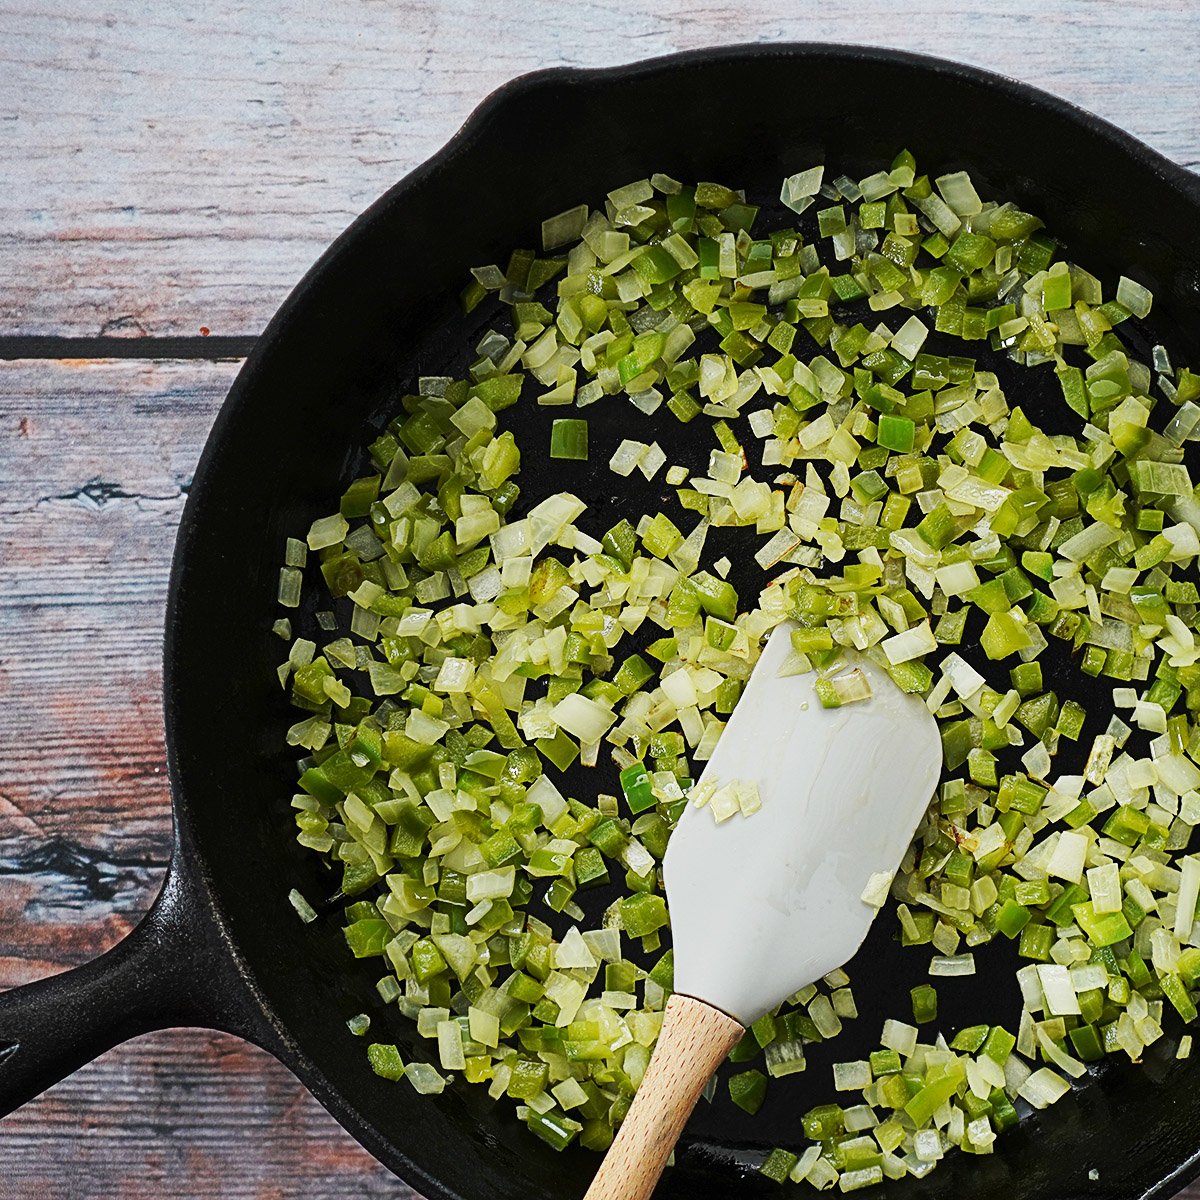 Sauteing onions and green bell peppers on an iron skillet